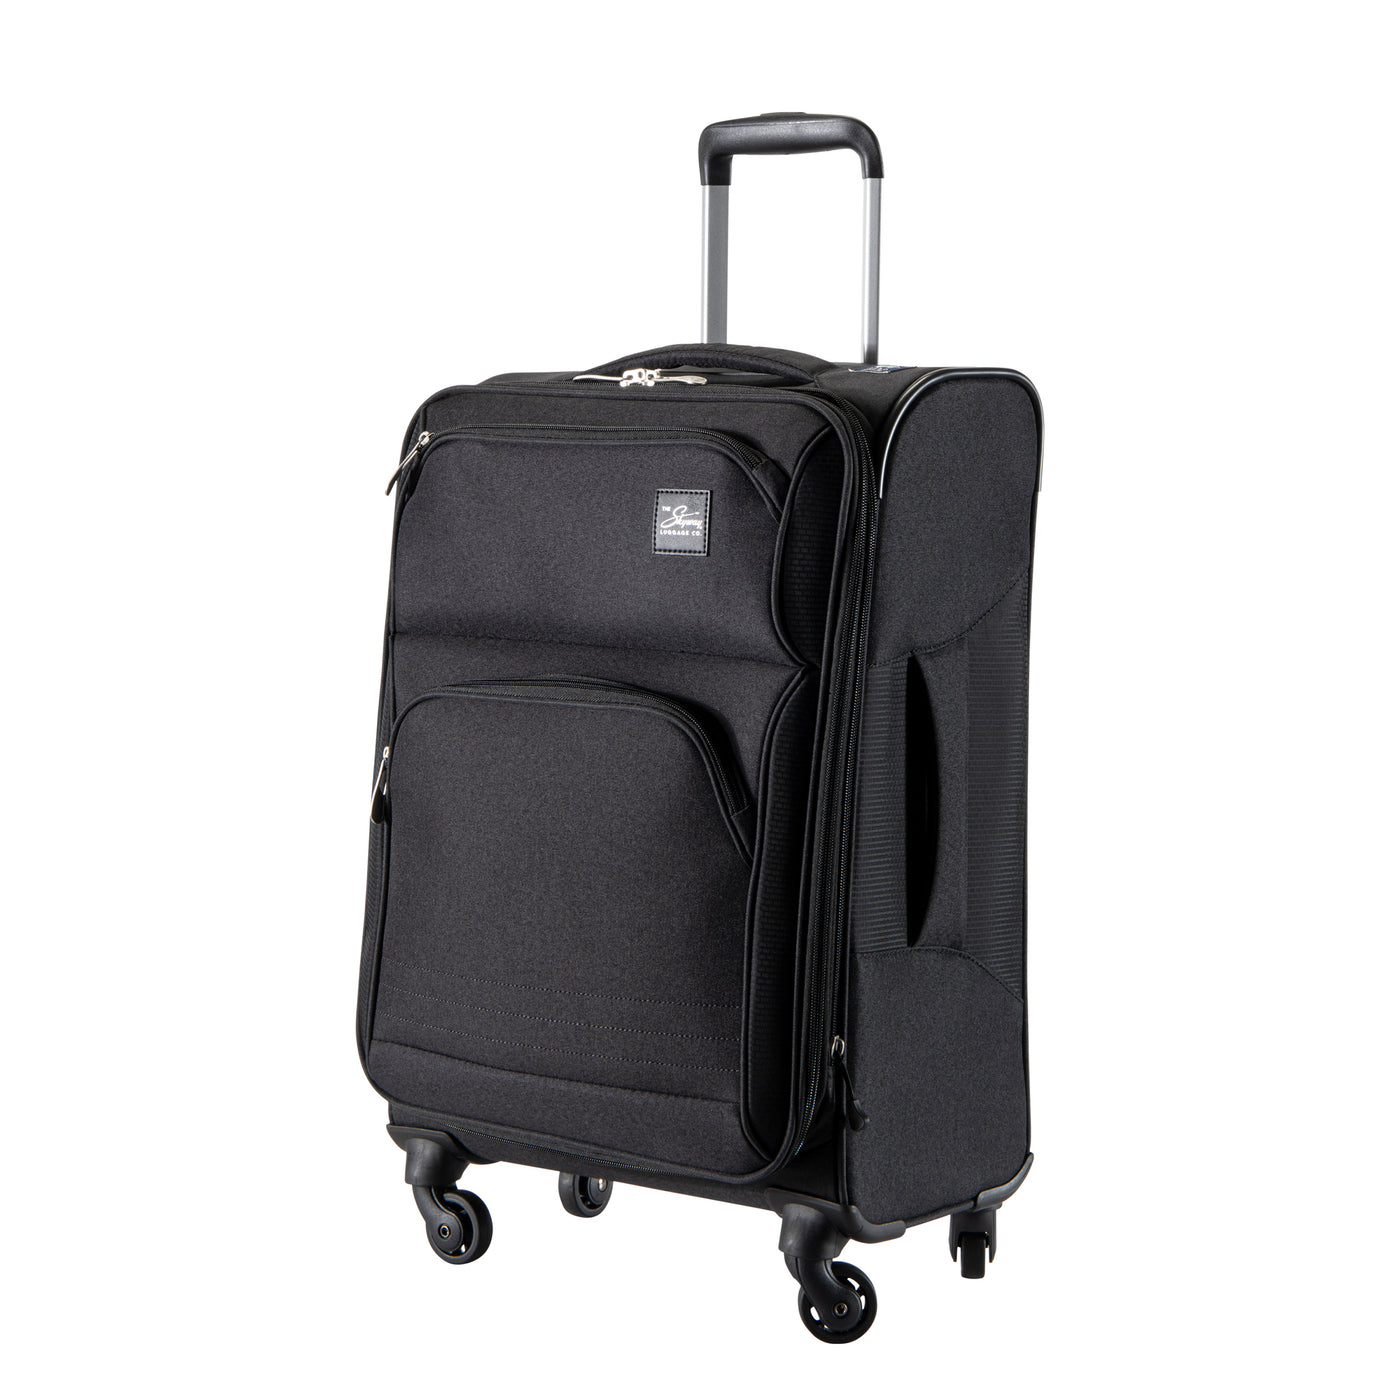 Hobart Bay 2 Piece Set - Carry-On and Medium Check-In